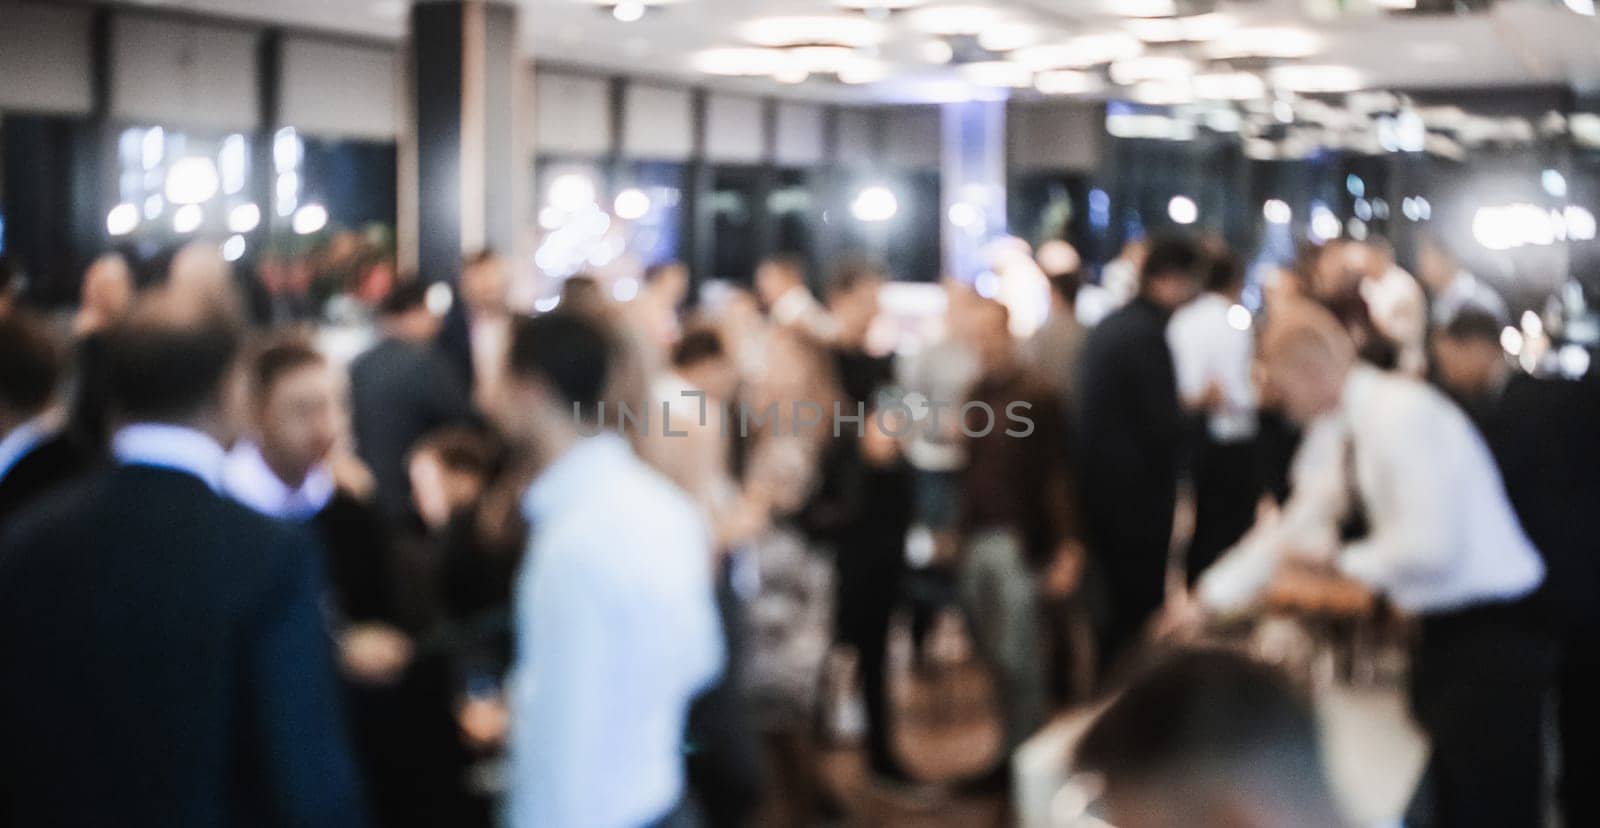 Blurred image of businesspeople at banquet event business meeting event. Business and entrepreneurship events concept by kasto